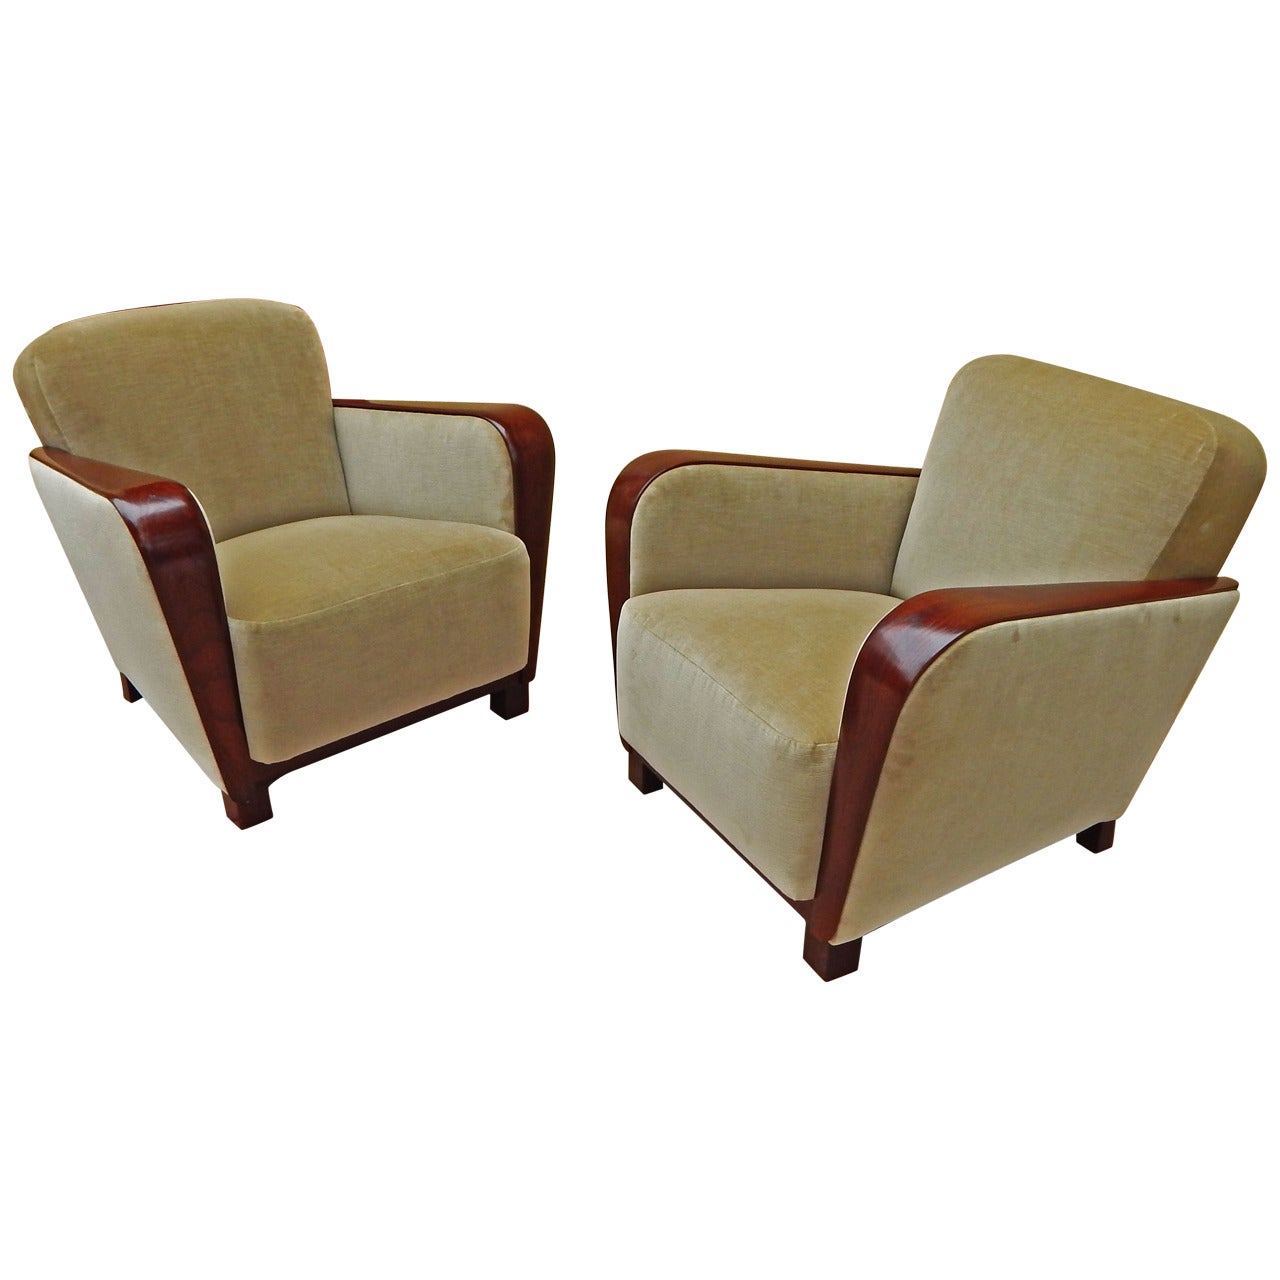 Pair of Swedish Art Moderne Armchairs with Paneled Wood Arms